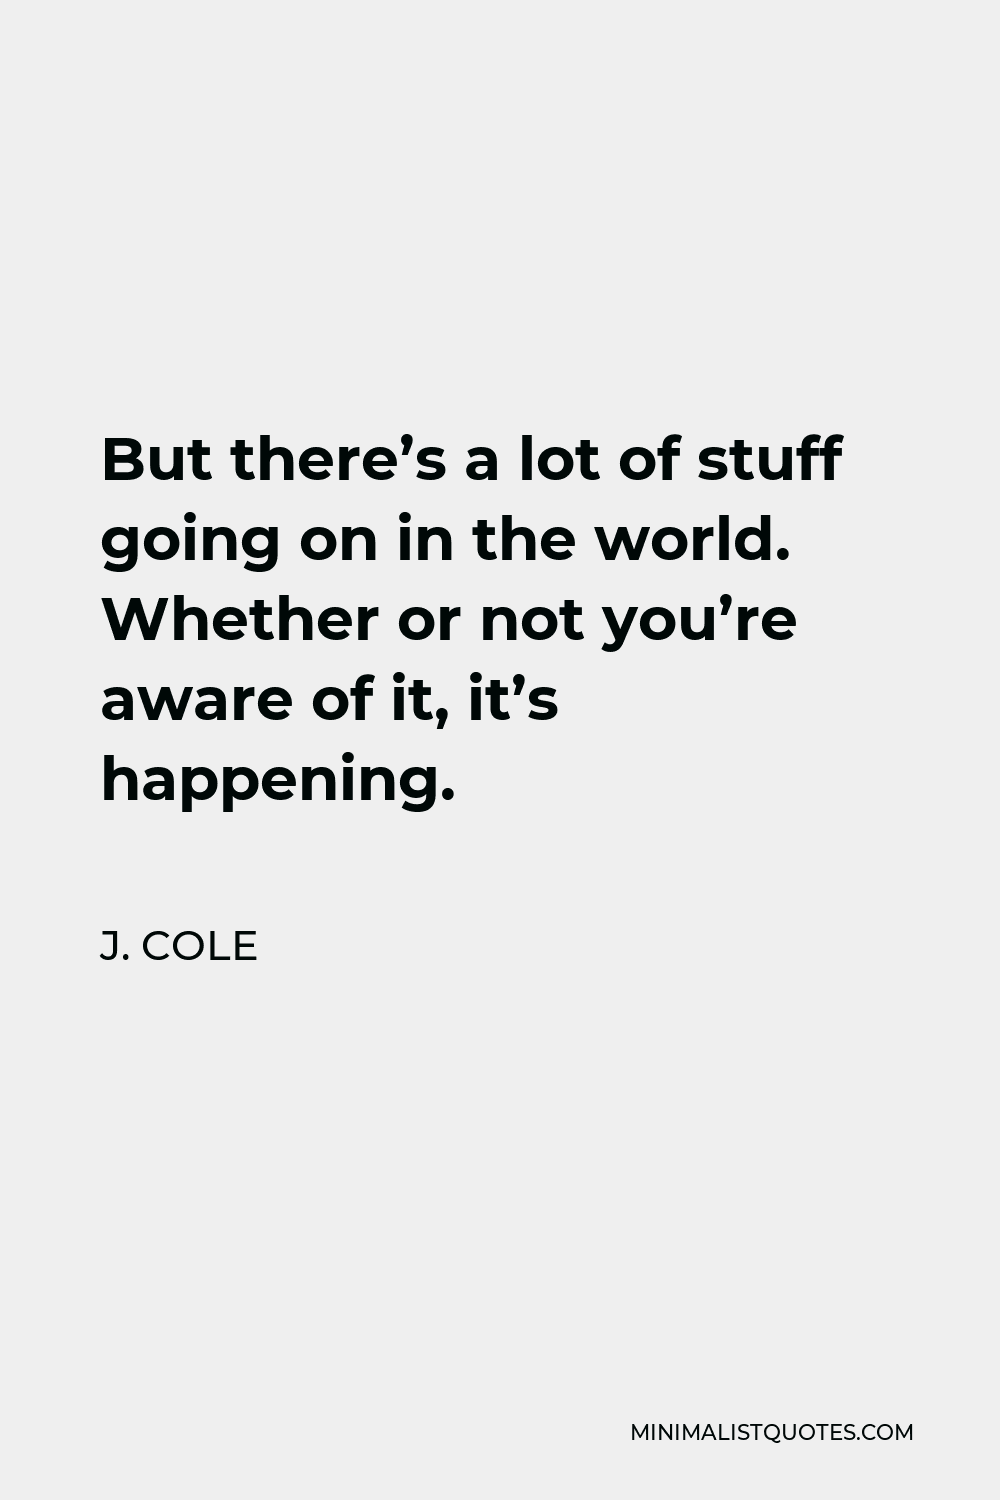 J. Cole Quote - But there’s a lot of stuff going on in the world. Whether or not you’re aware of it, it’s happening.